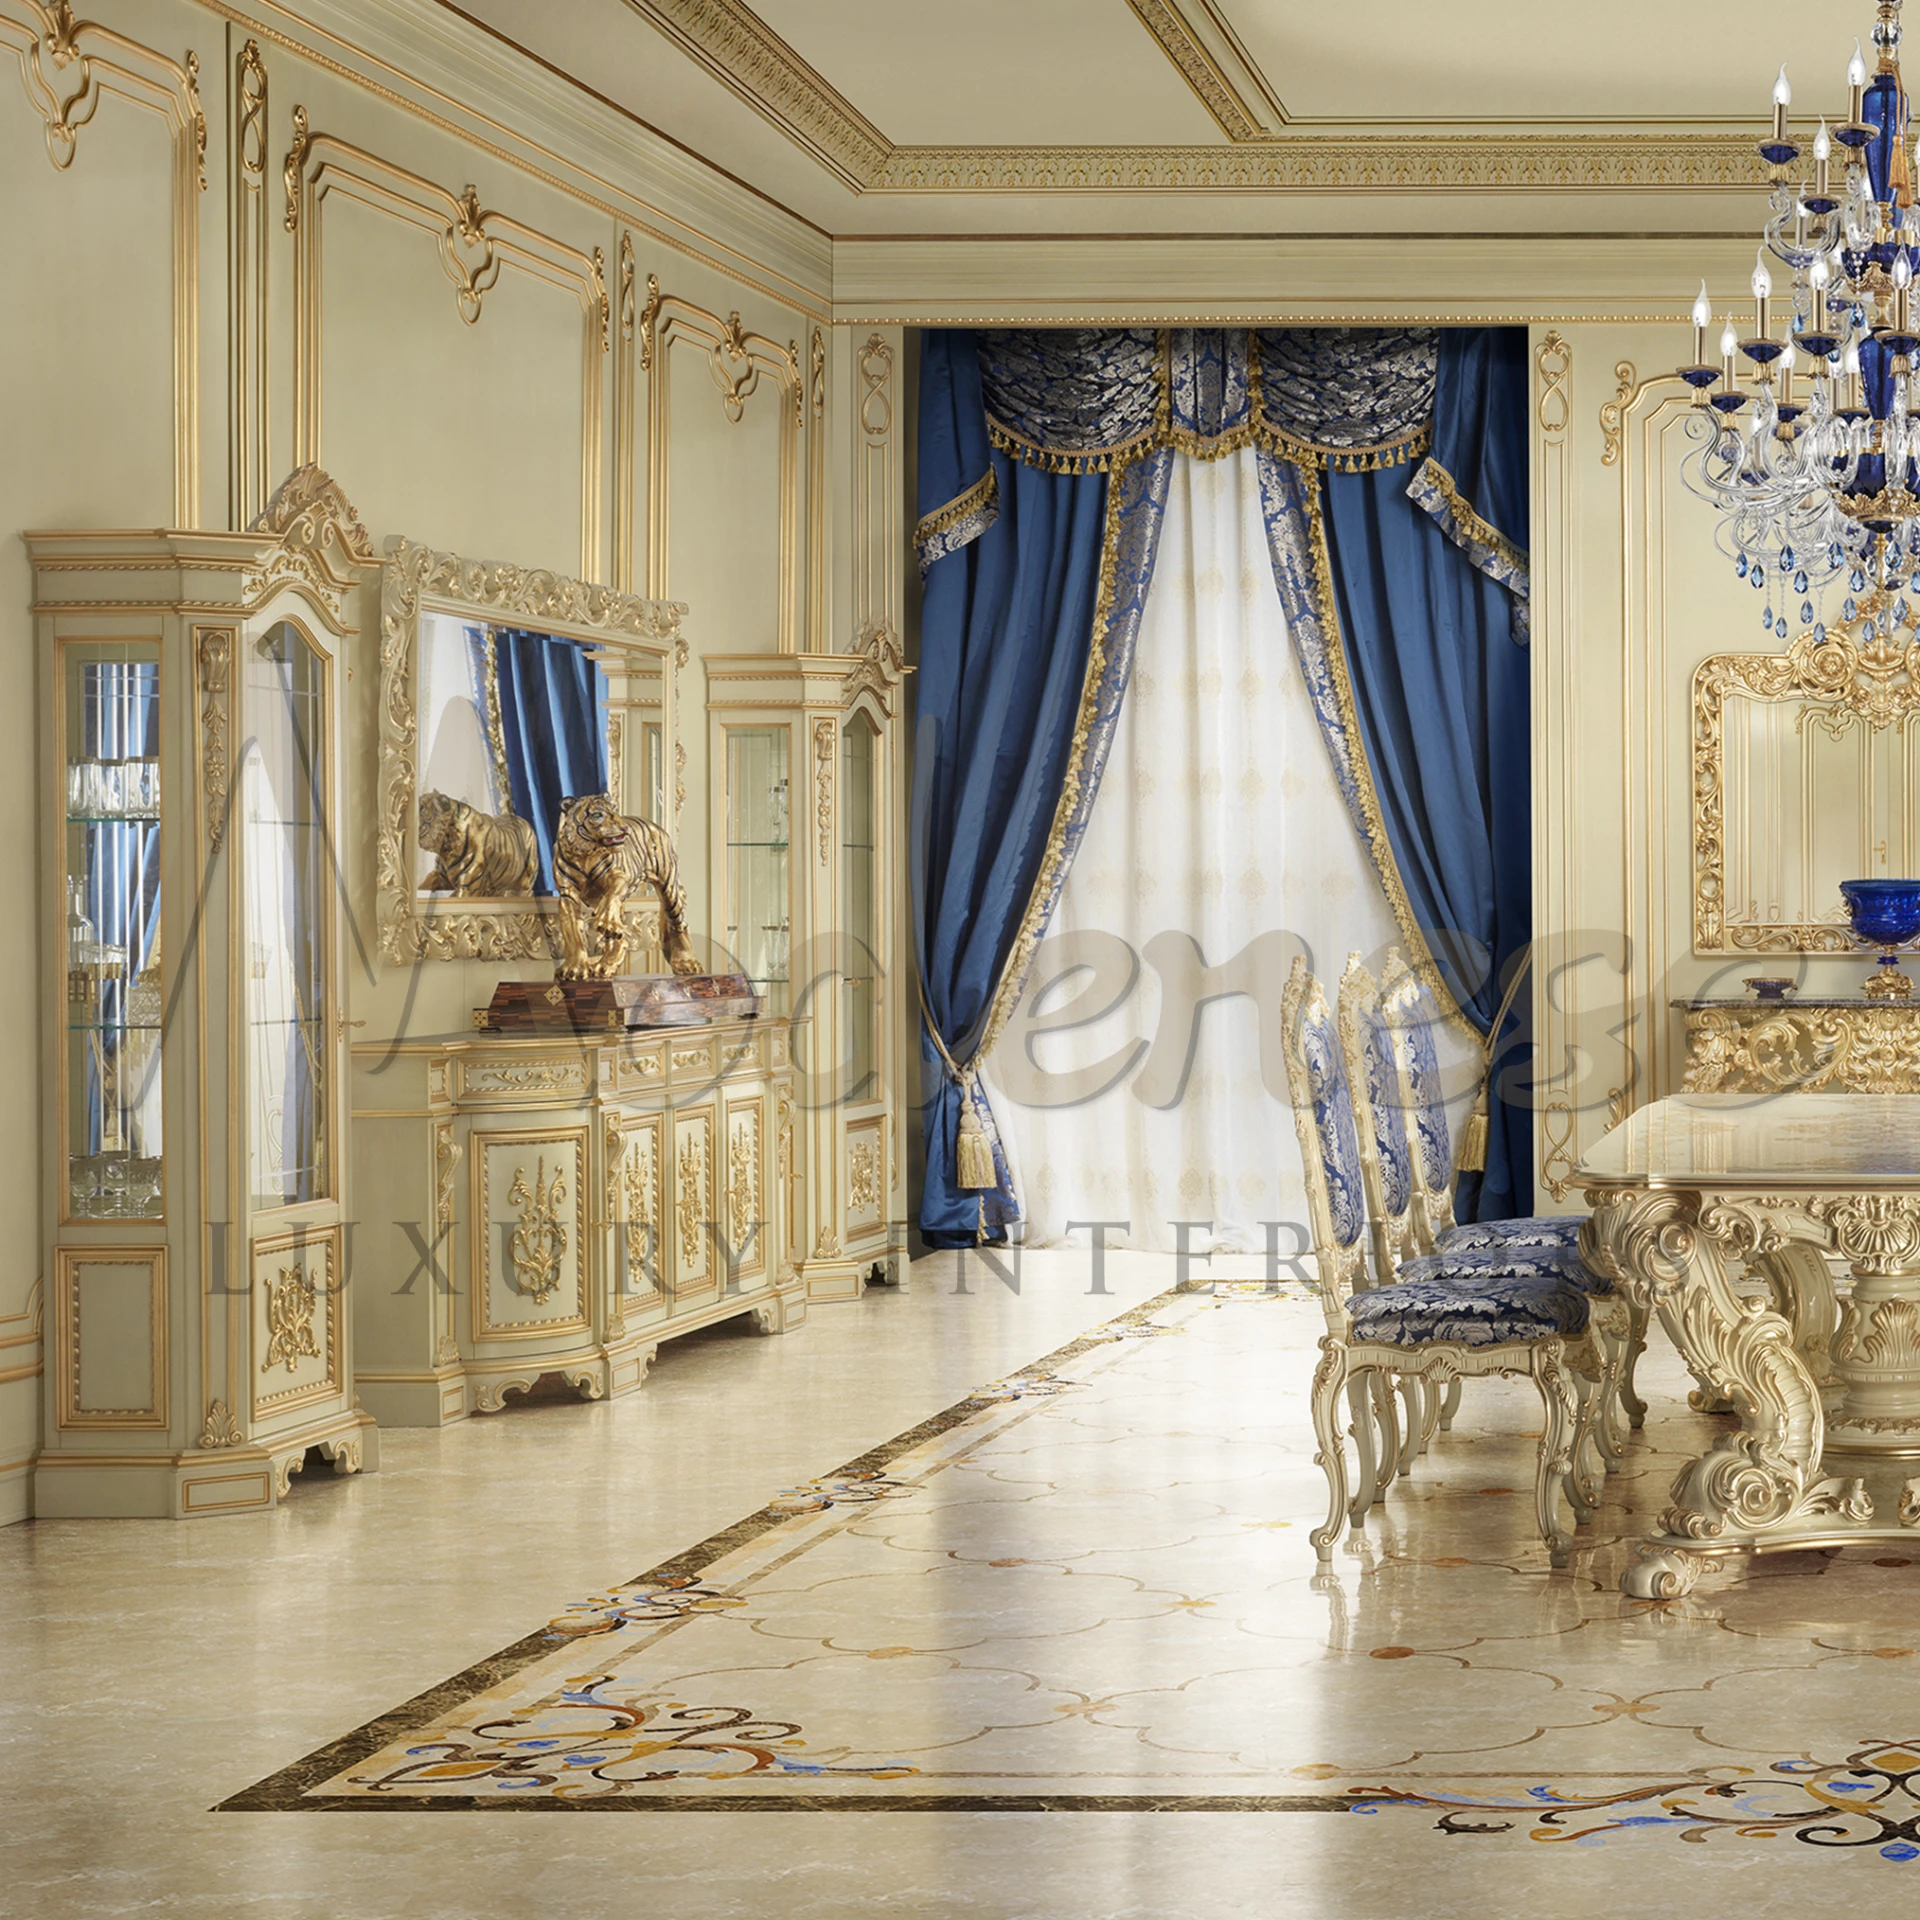 Luxurious room showing gold details on furniture, sophisticated curtains, and an lovely crystal chandelier